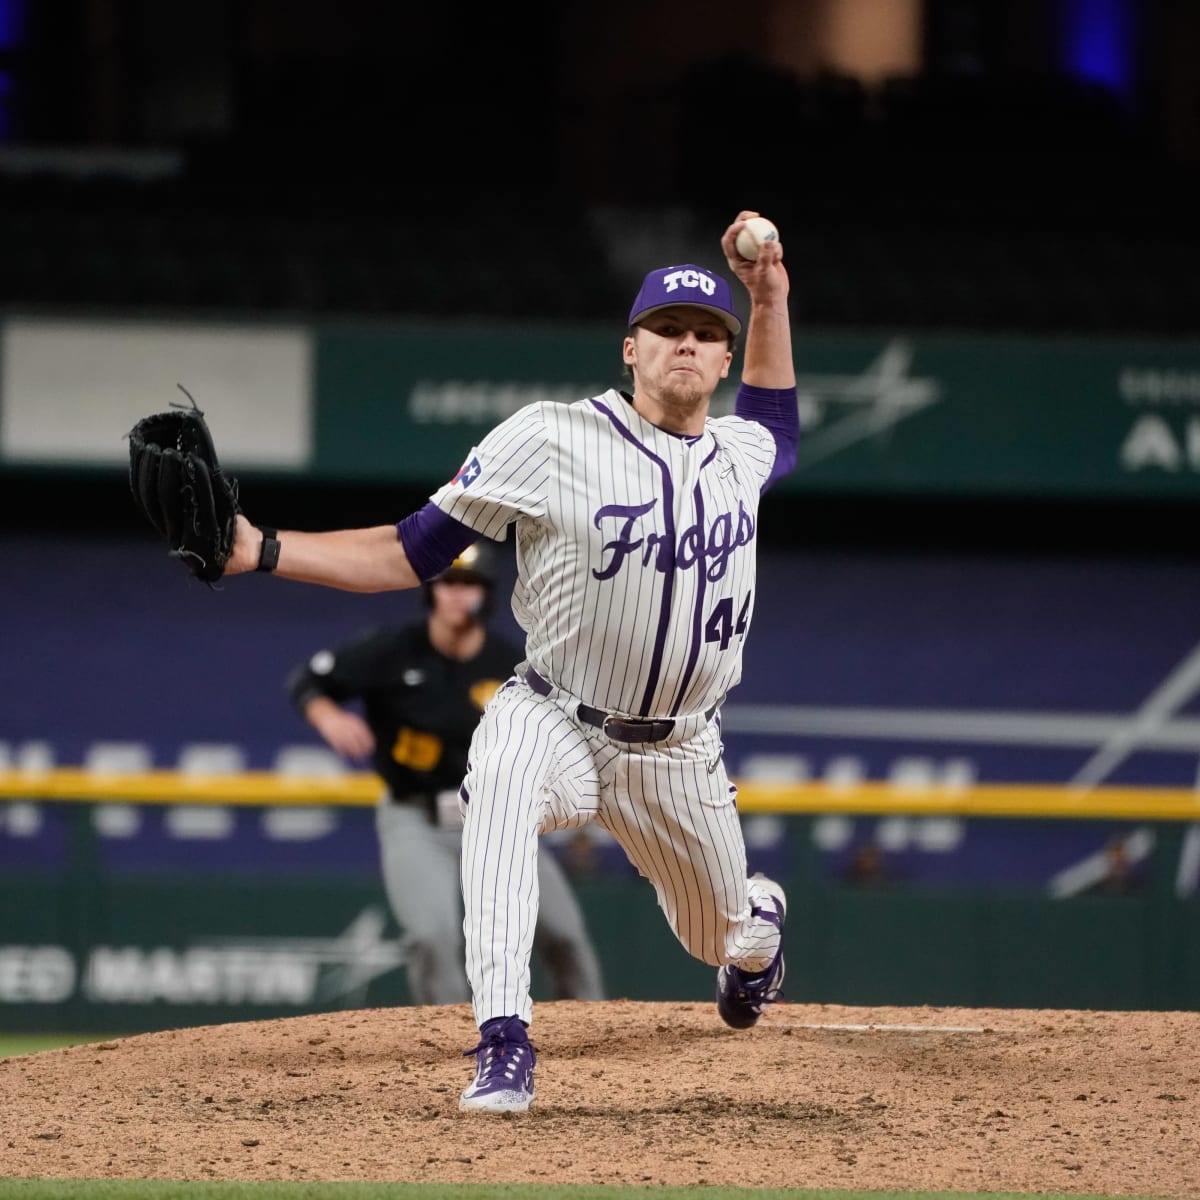 Watch Michigan vs TCU Stream college baseball live, TV channel - How to Watch and Stream Major League and College Sports